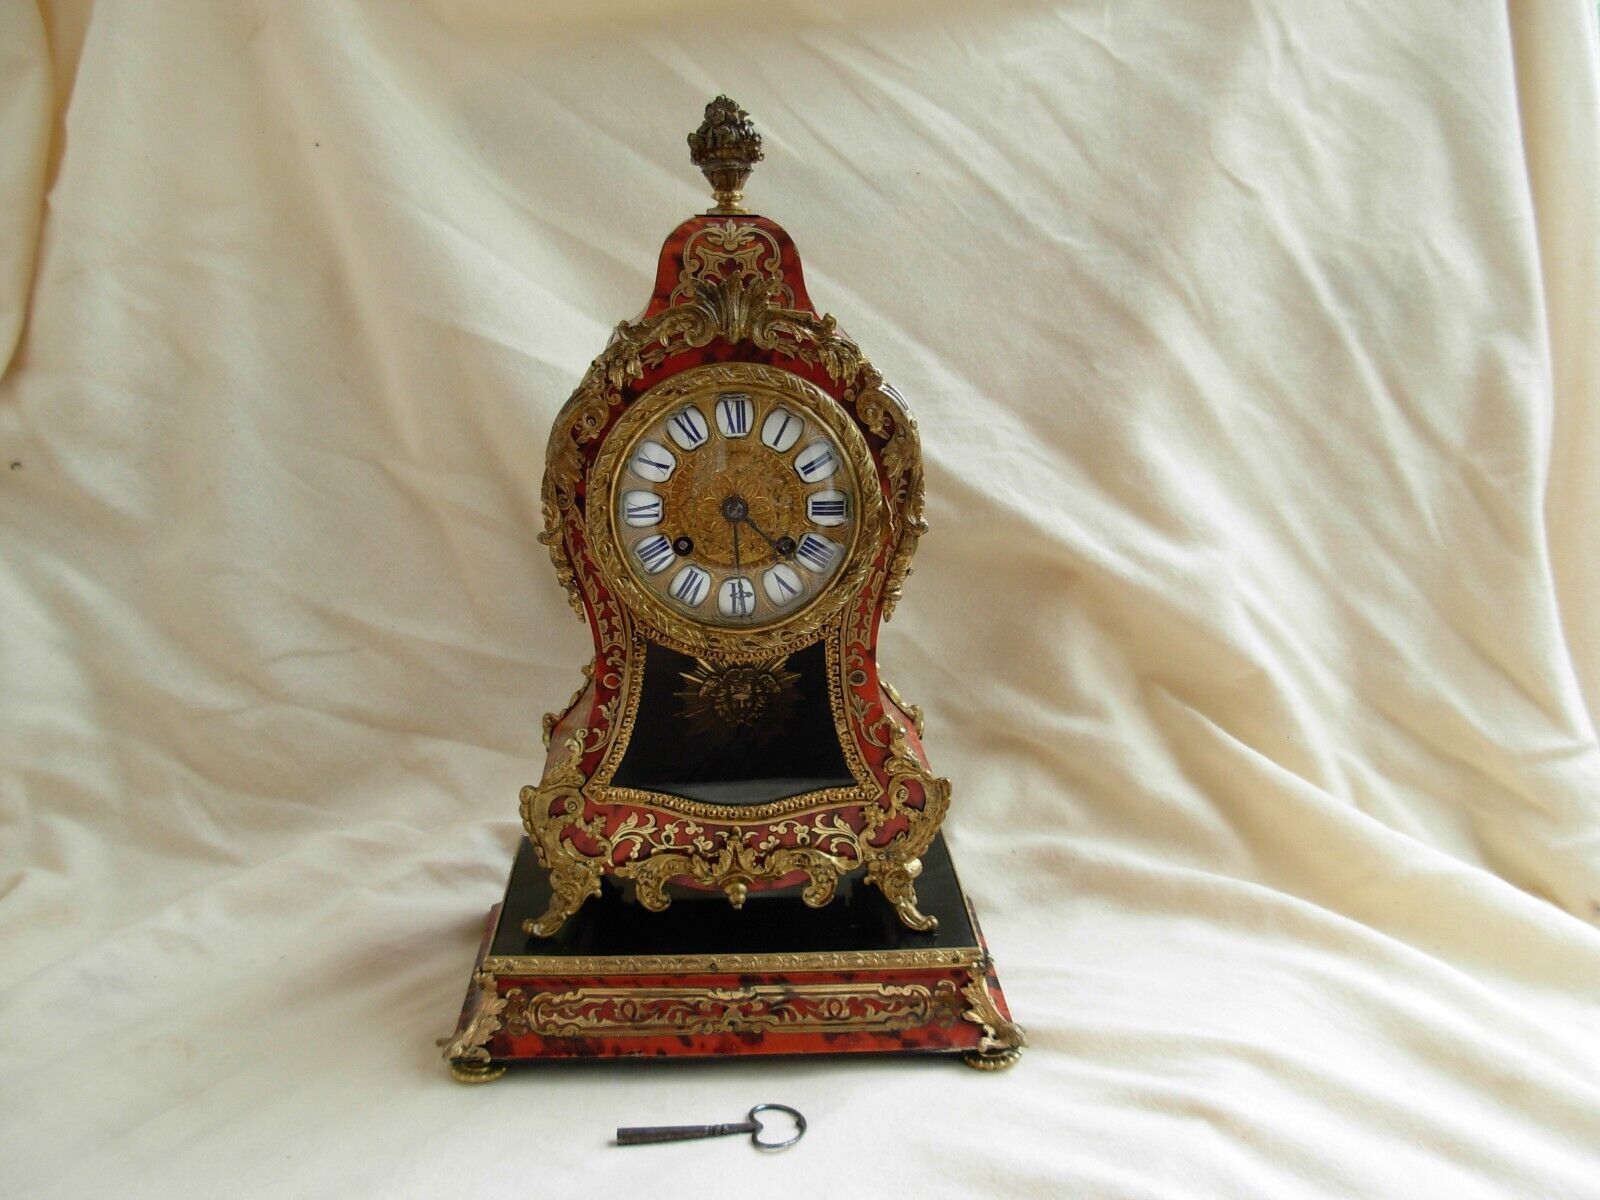 ANTIQUE FRENCH BOULLE MARQUETRY CLOCK,WORKING ORDER,NAPOLEON III ERA.